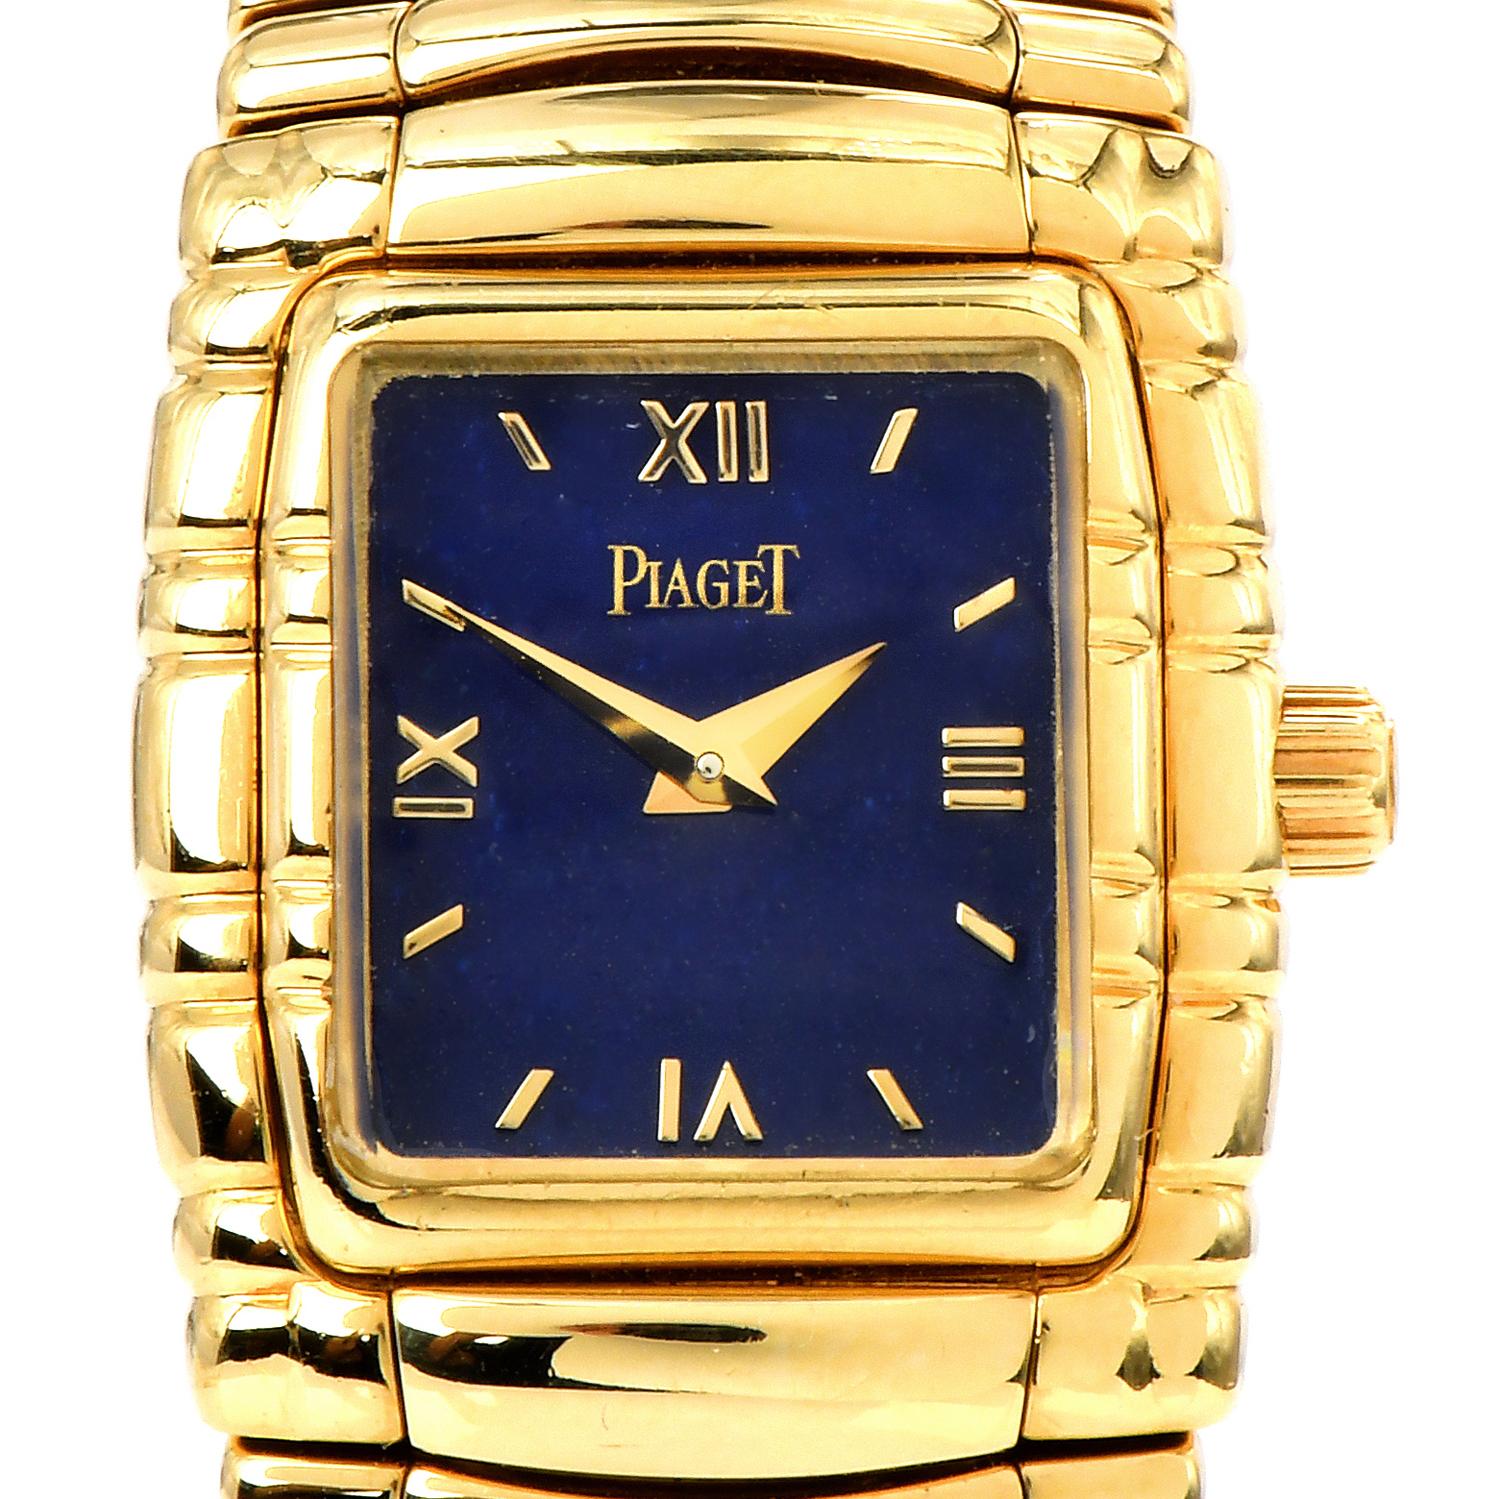 Piaget Tanagra, ref. 16051 M 401 D.

This circa 1990 watch is solid 18K yellow gold and features a Rare Genuine Lapis dial with gold Roman numeral markers and dauphine hands.

This watch is a Piaget quartz movement

Dial, case, Band, and